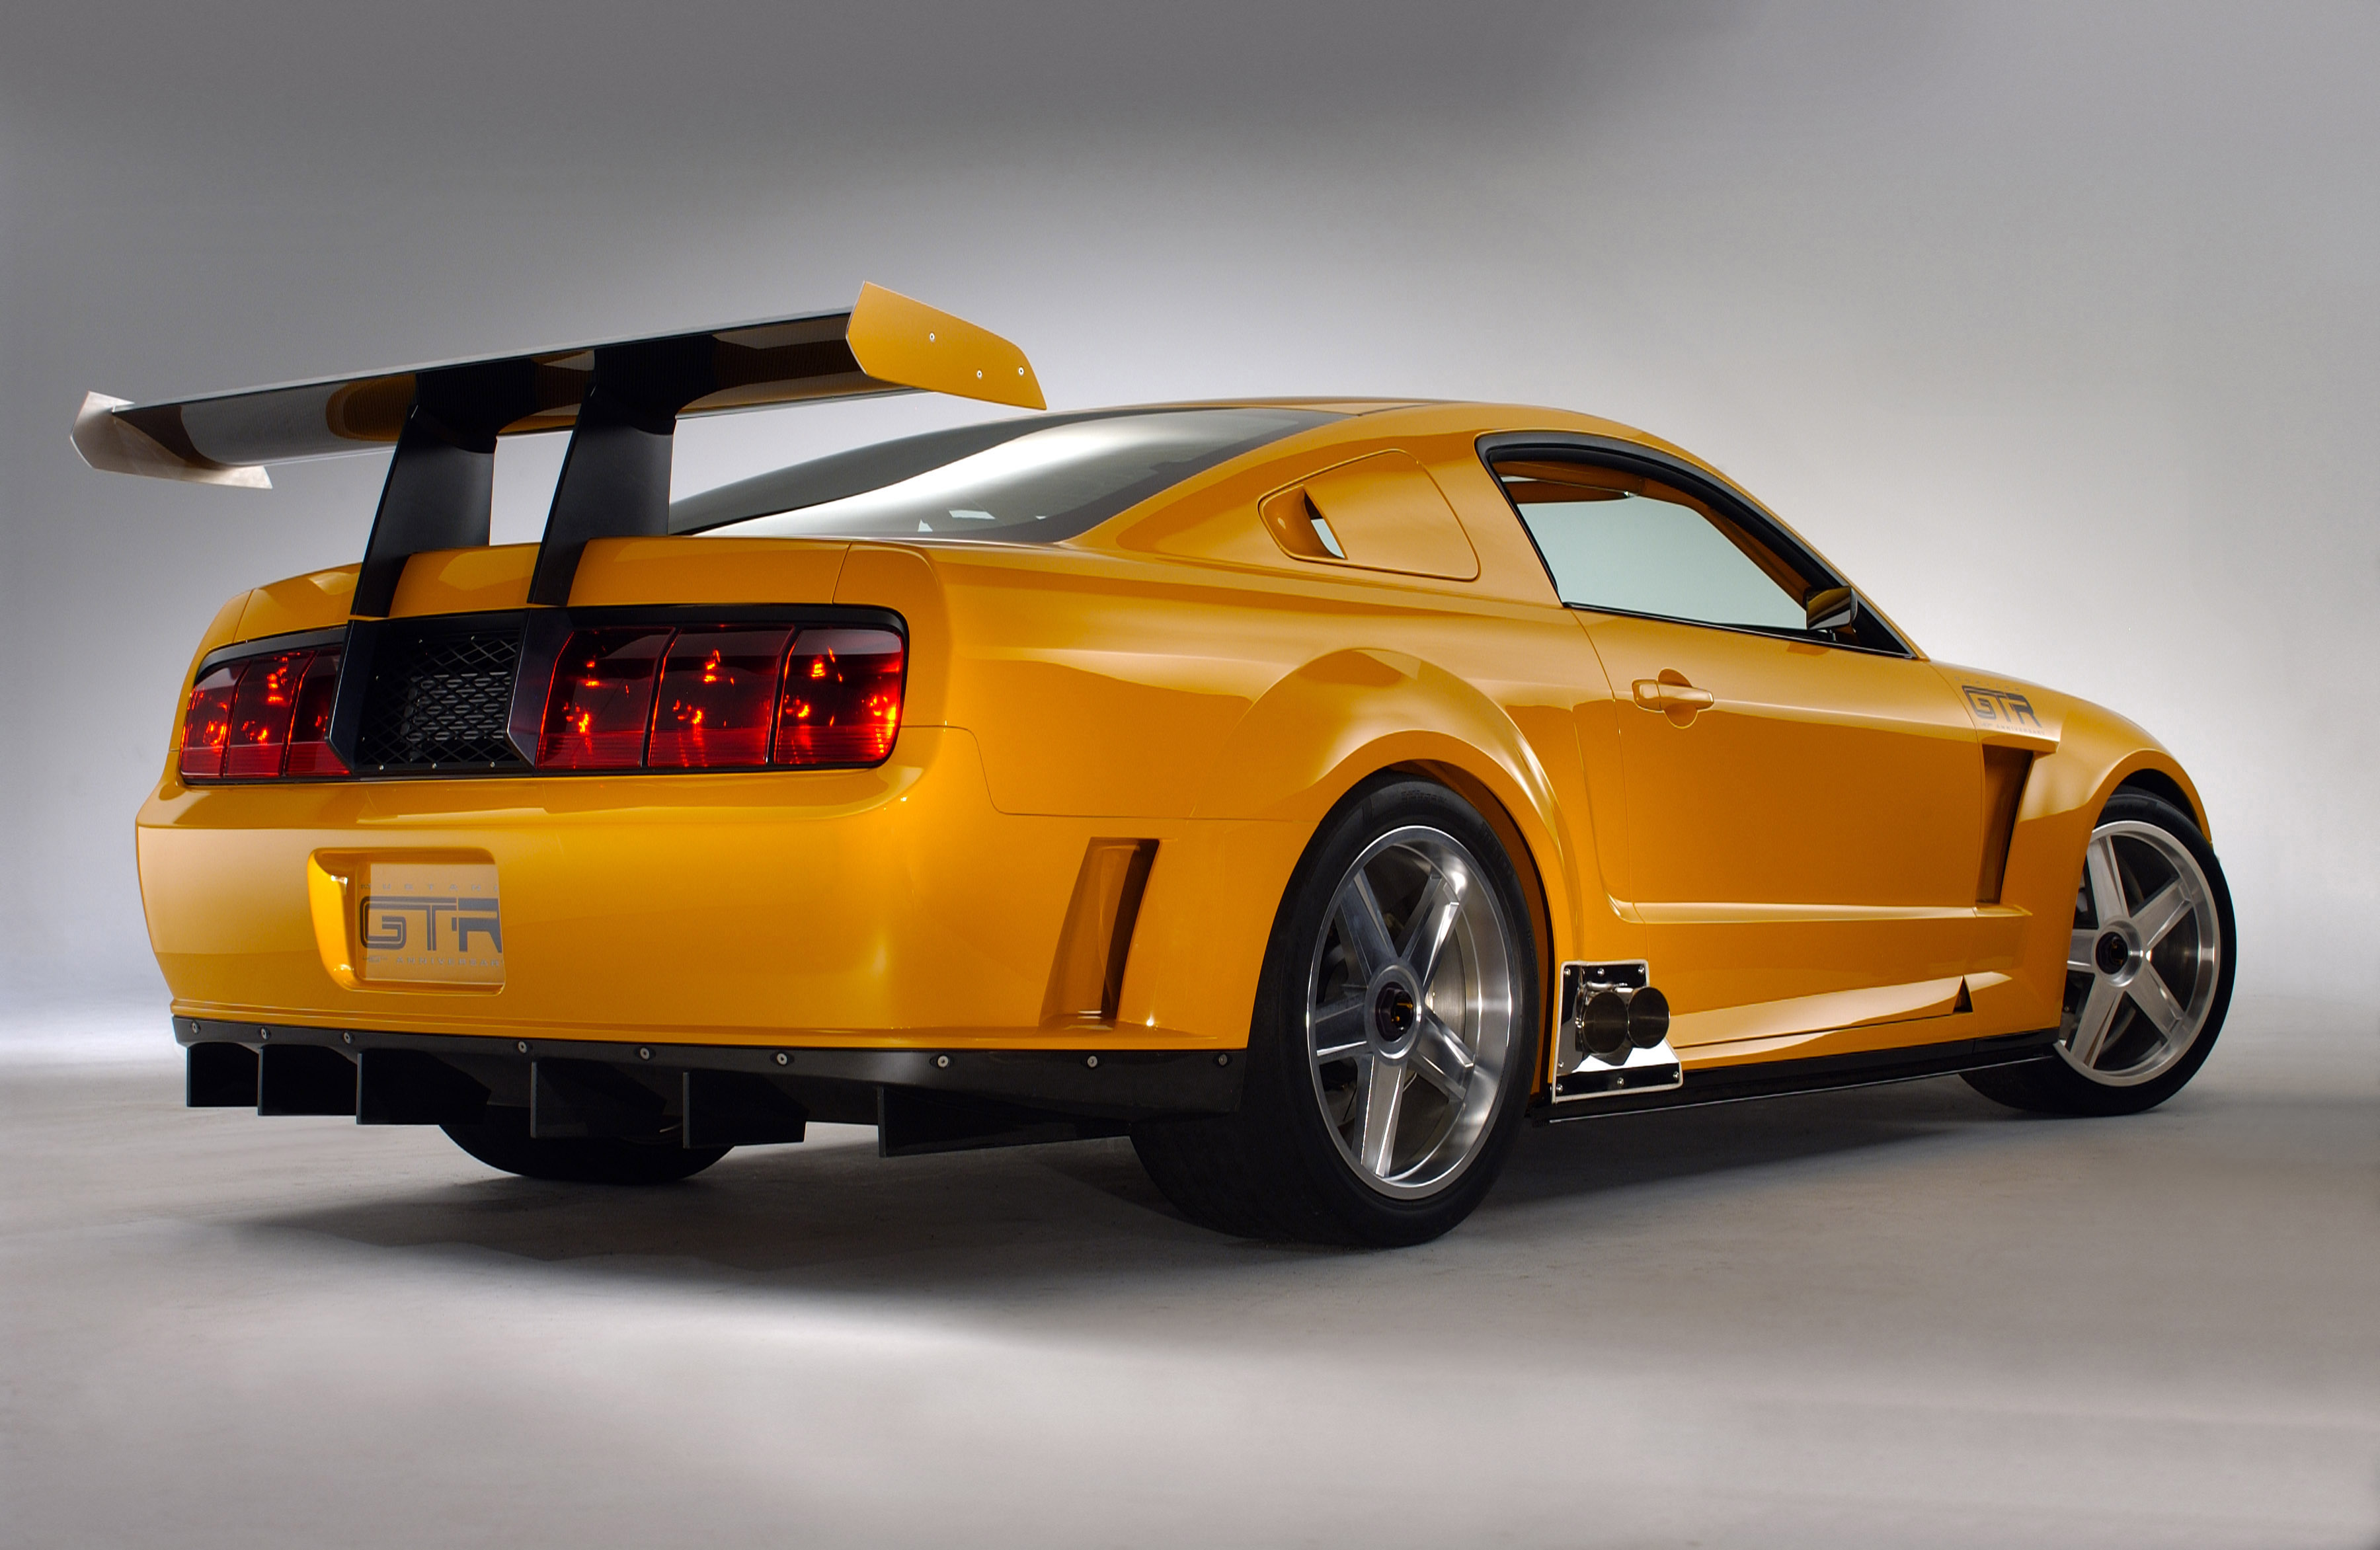 Мустанг р. Ford Mustang GTR Concept 2005. Ford Mustang GTR Concept. Форд Мустанг gt 2004. Ford Mustang gt-r.